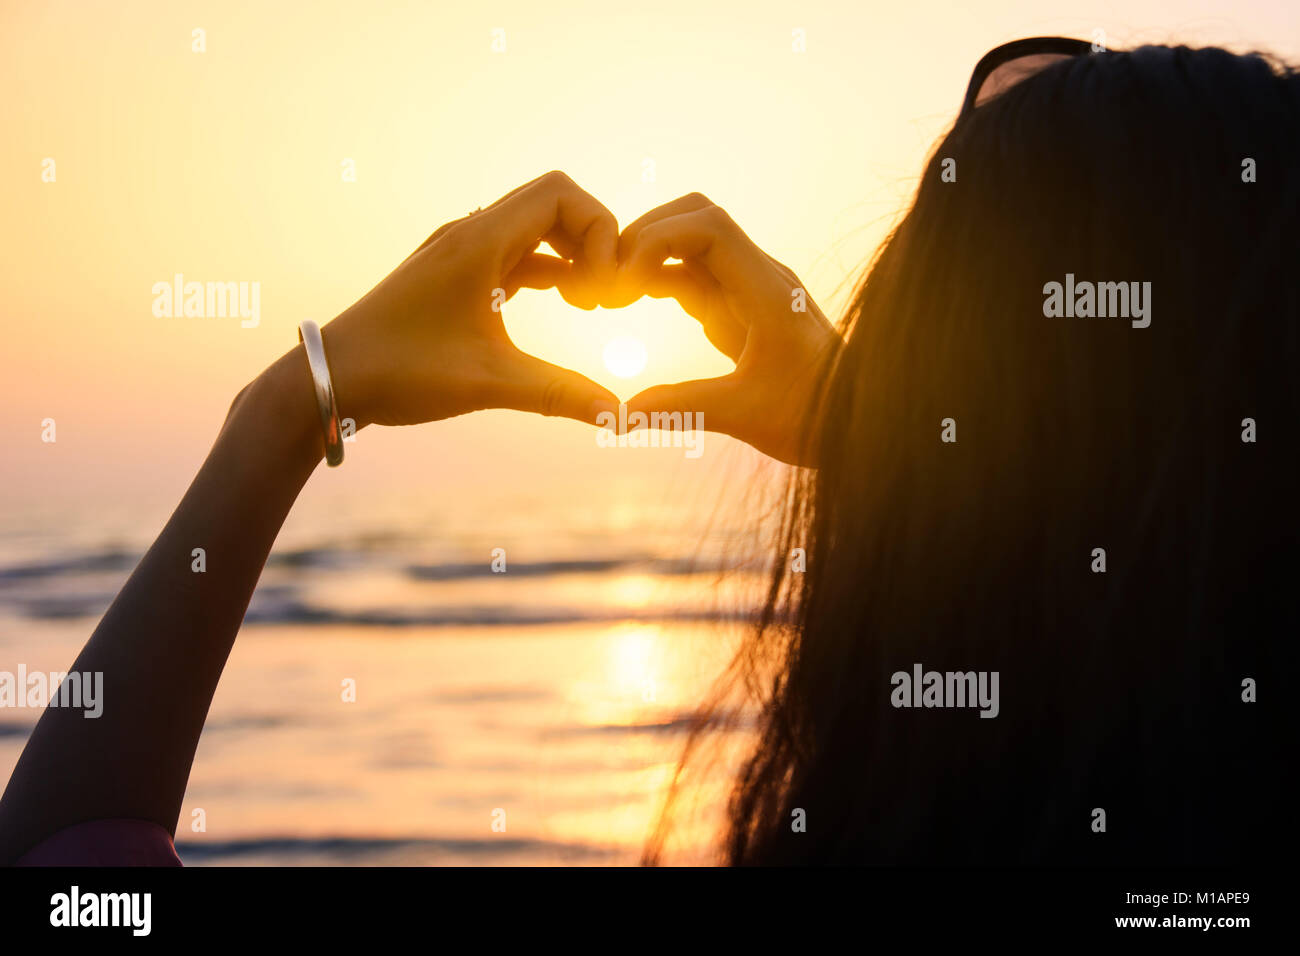 Girl making heart shape with hands in the sunset by seaside Stock Photo